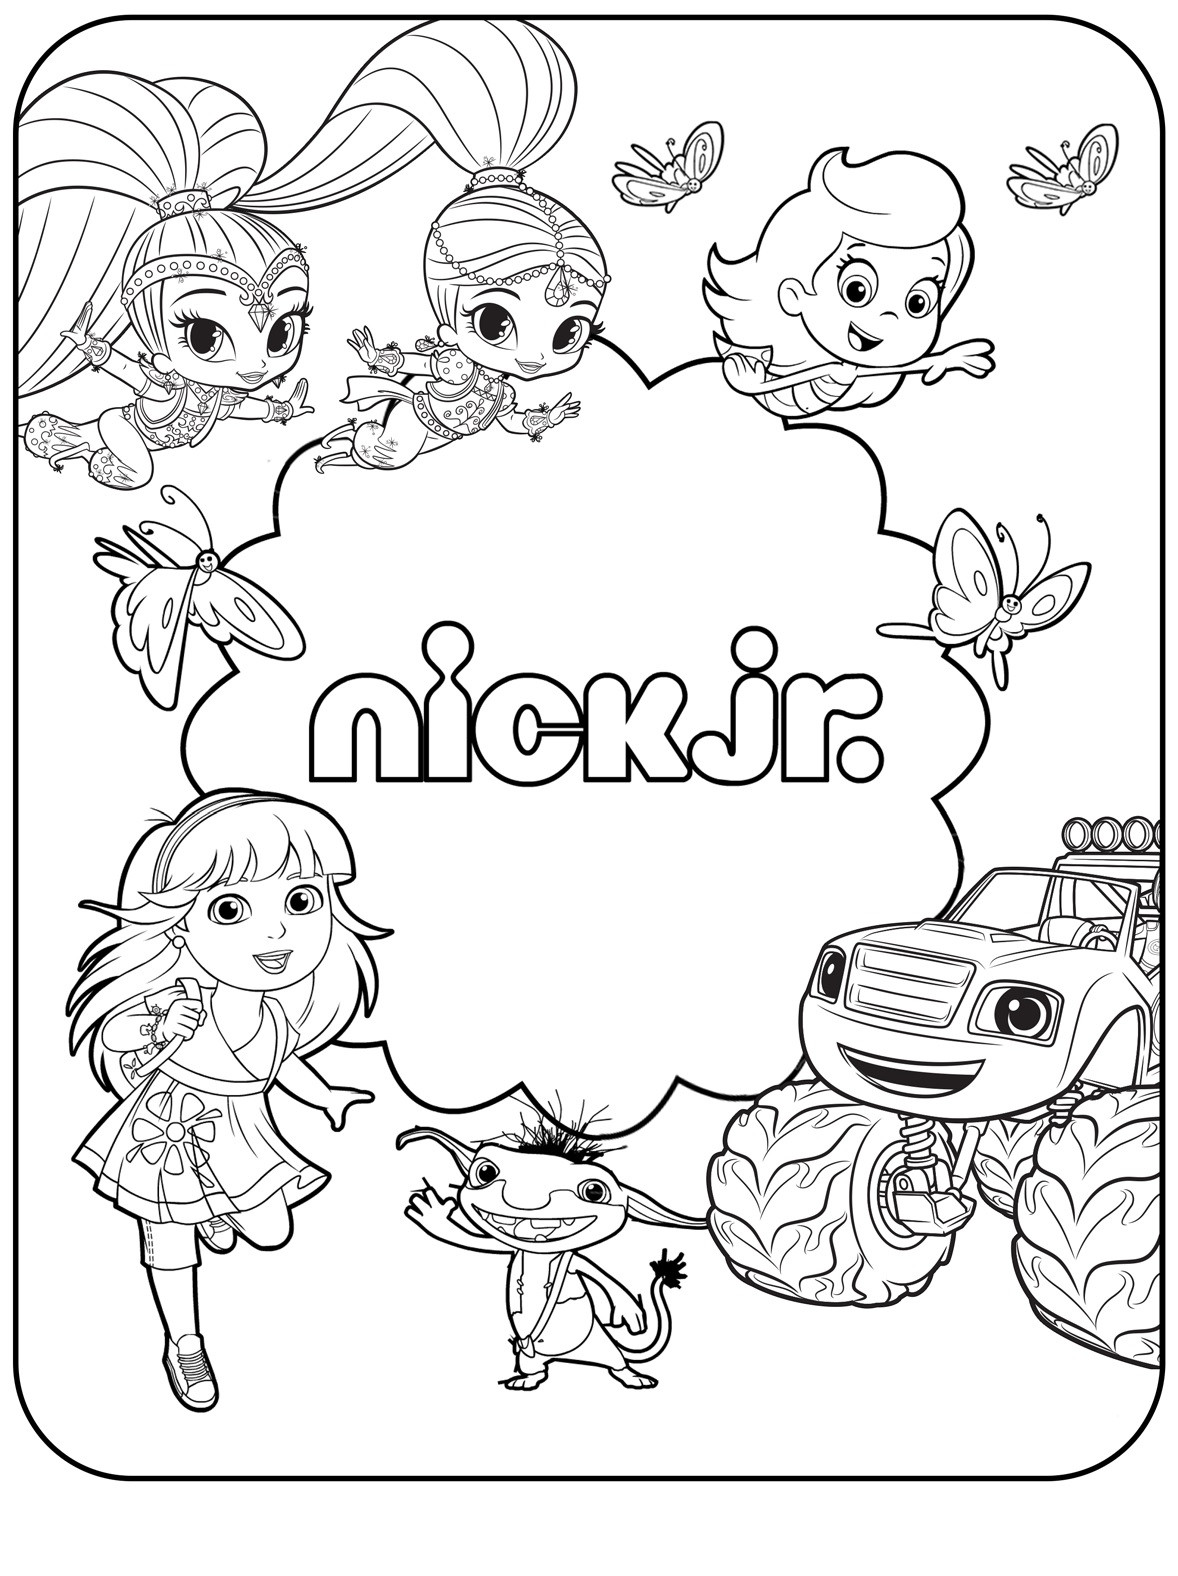 Nick Coloring Pages For Kids
 Nick jr coloring book